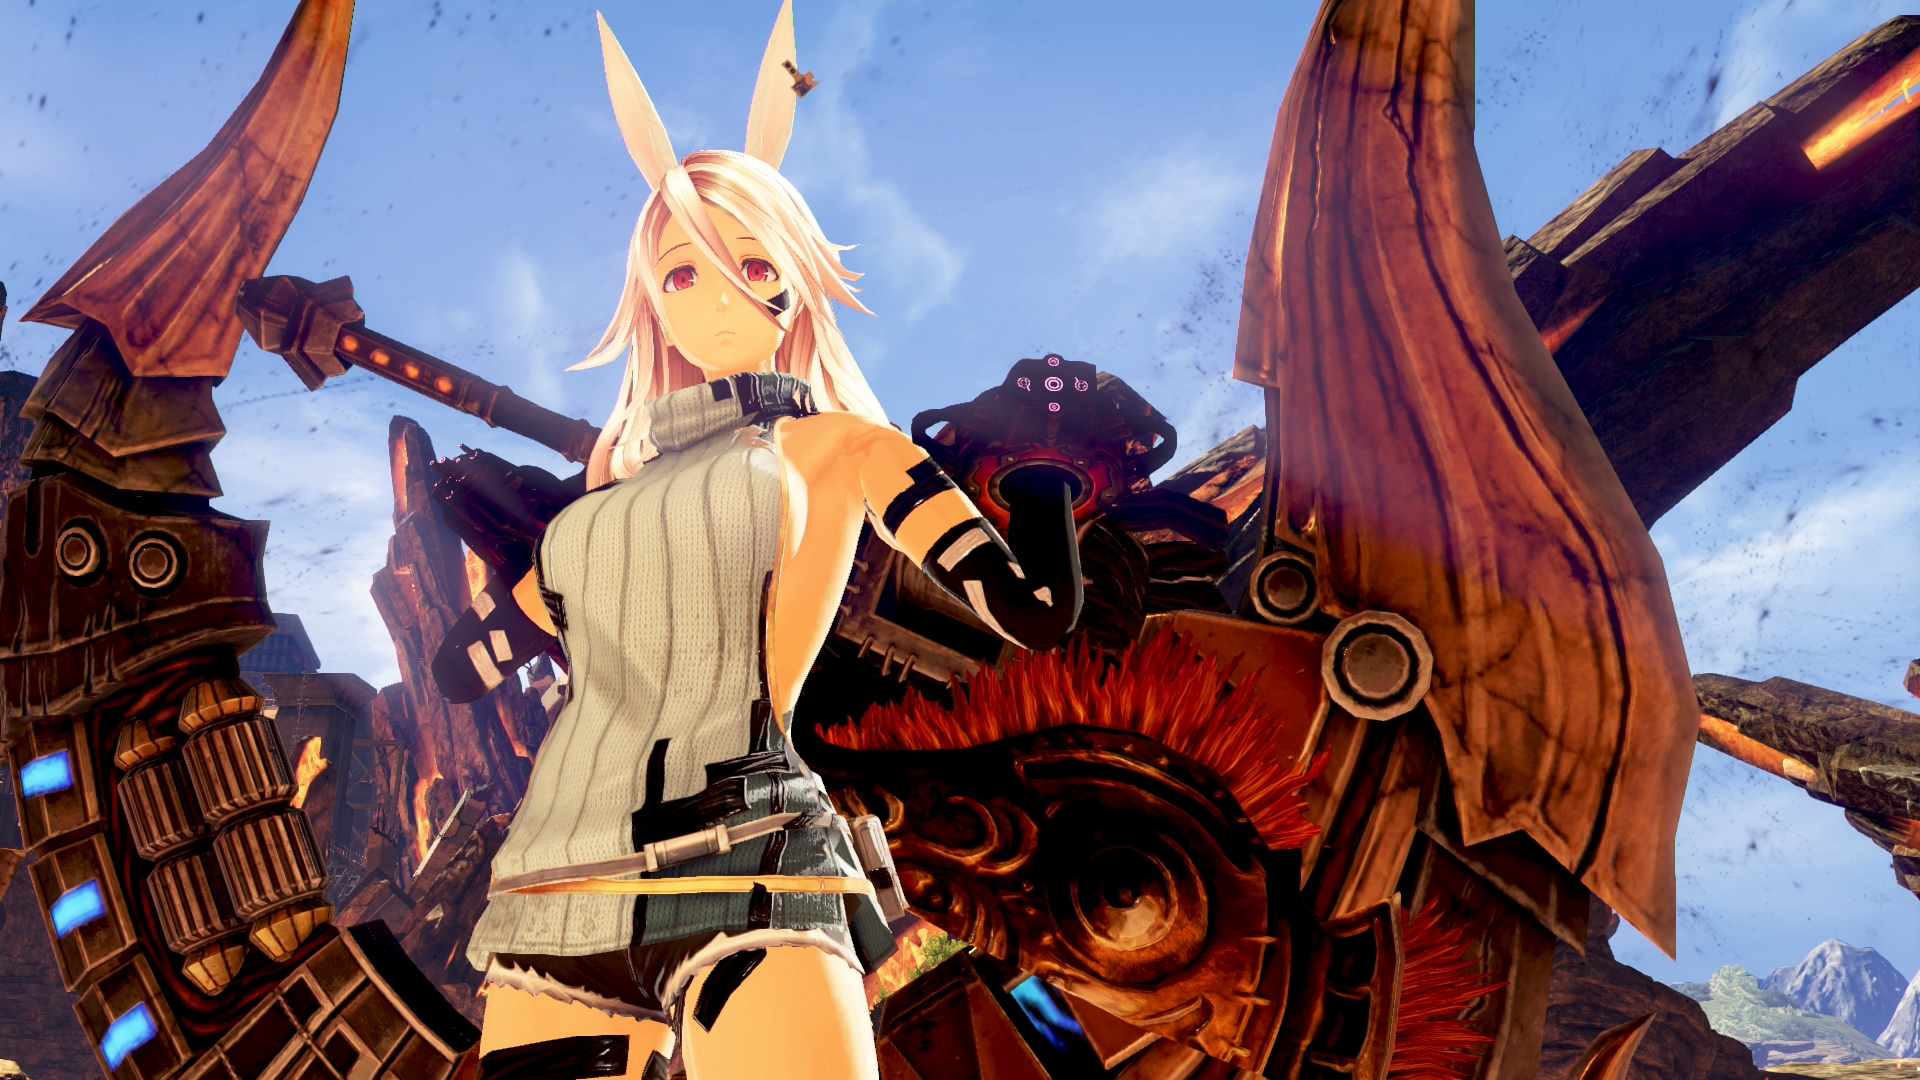 Check out the background of God Eater 3's Assault Missions